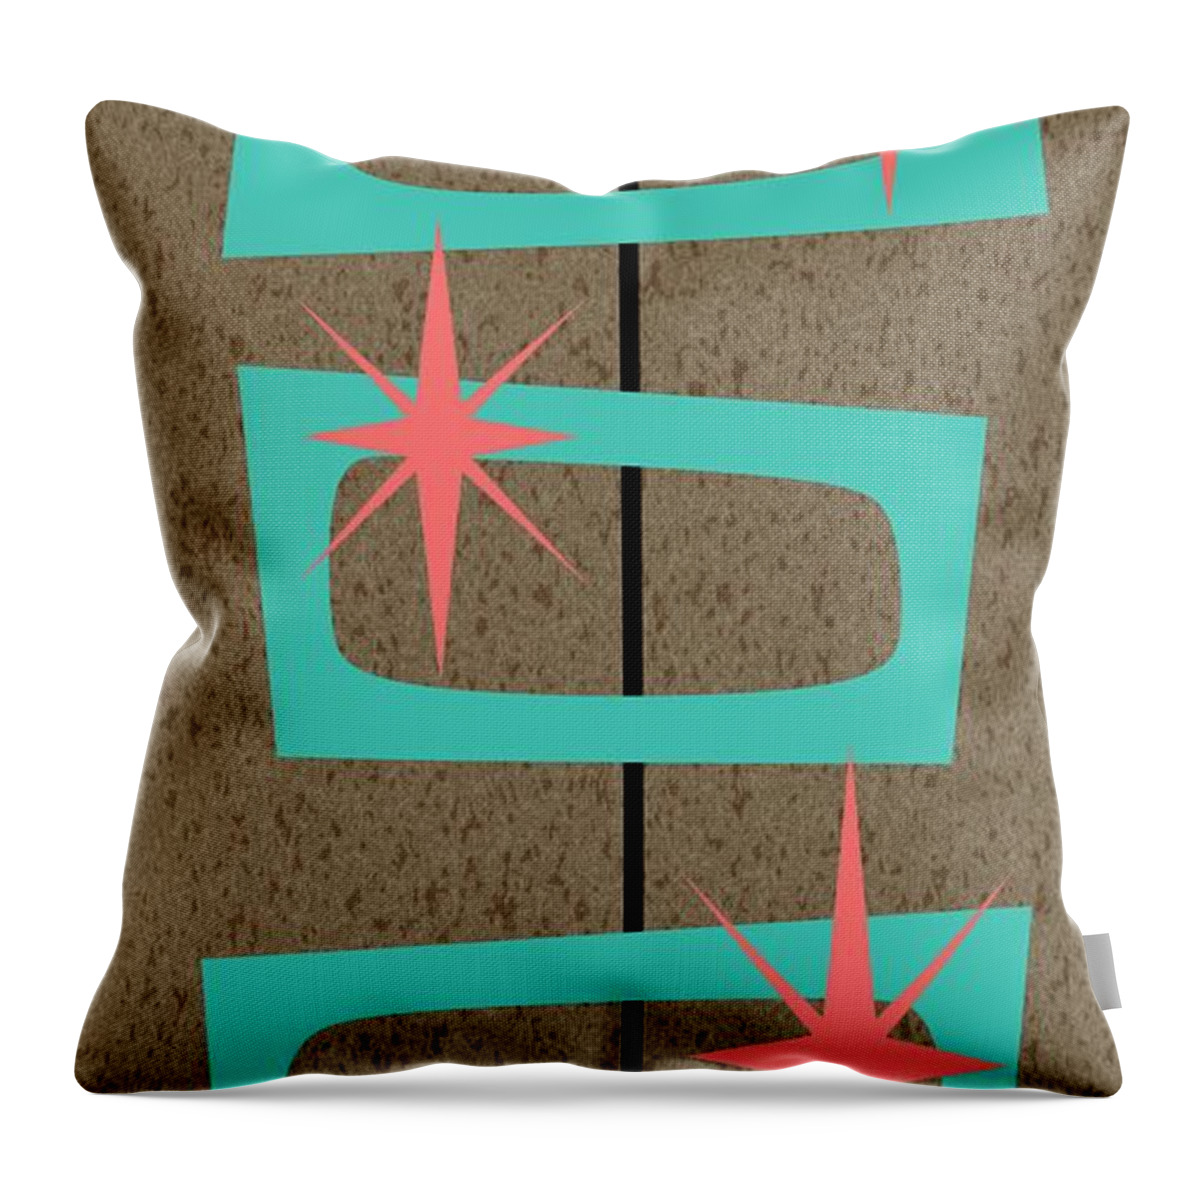 Pink Throw Pillow featuring the digital art Mid Century Modern Shapes 9 by Donna Mibus